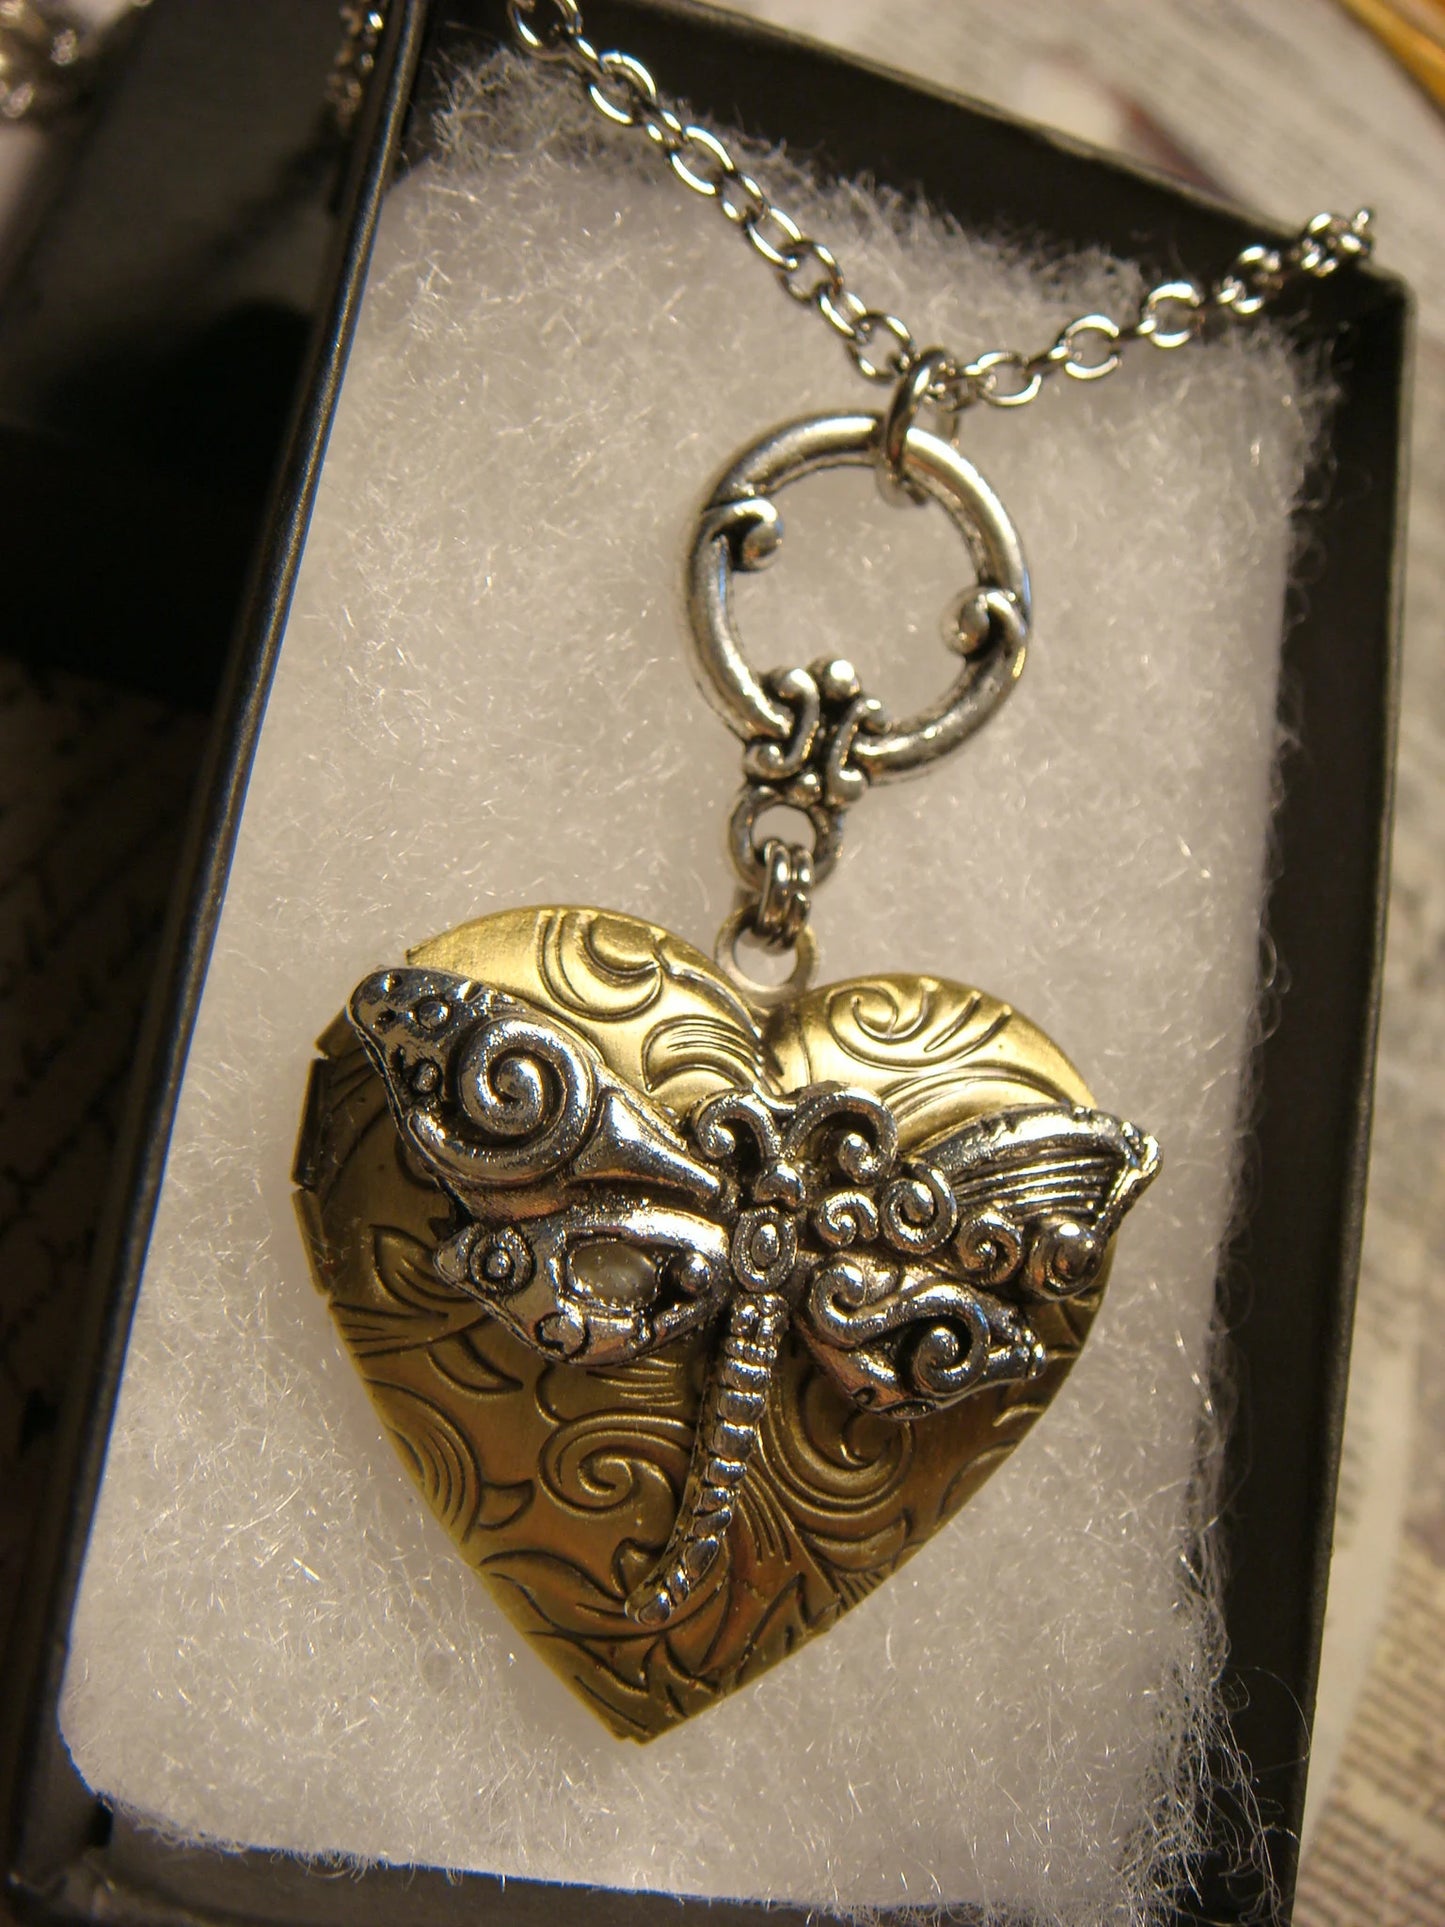 Dragonfly Heart Locket Necklace in Antique Silver and Bronze